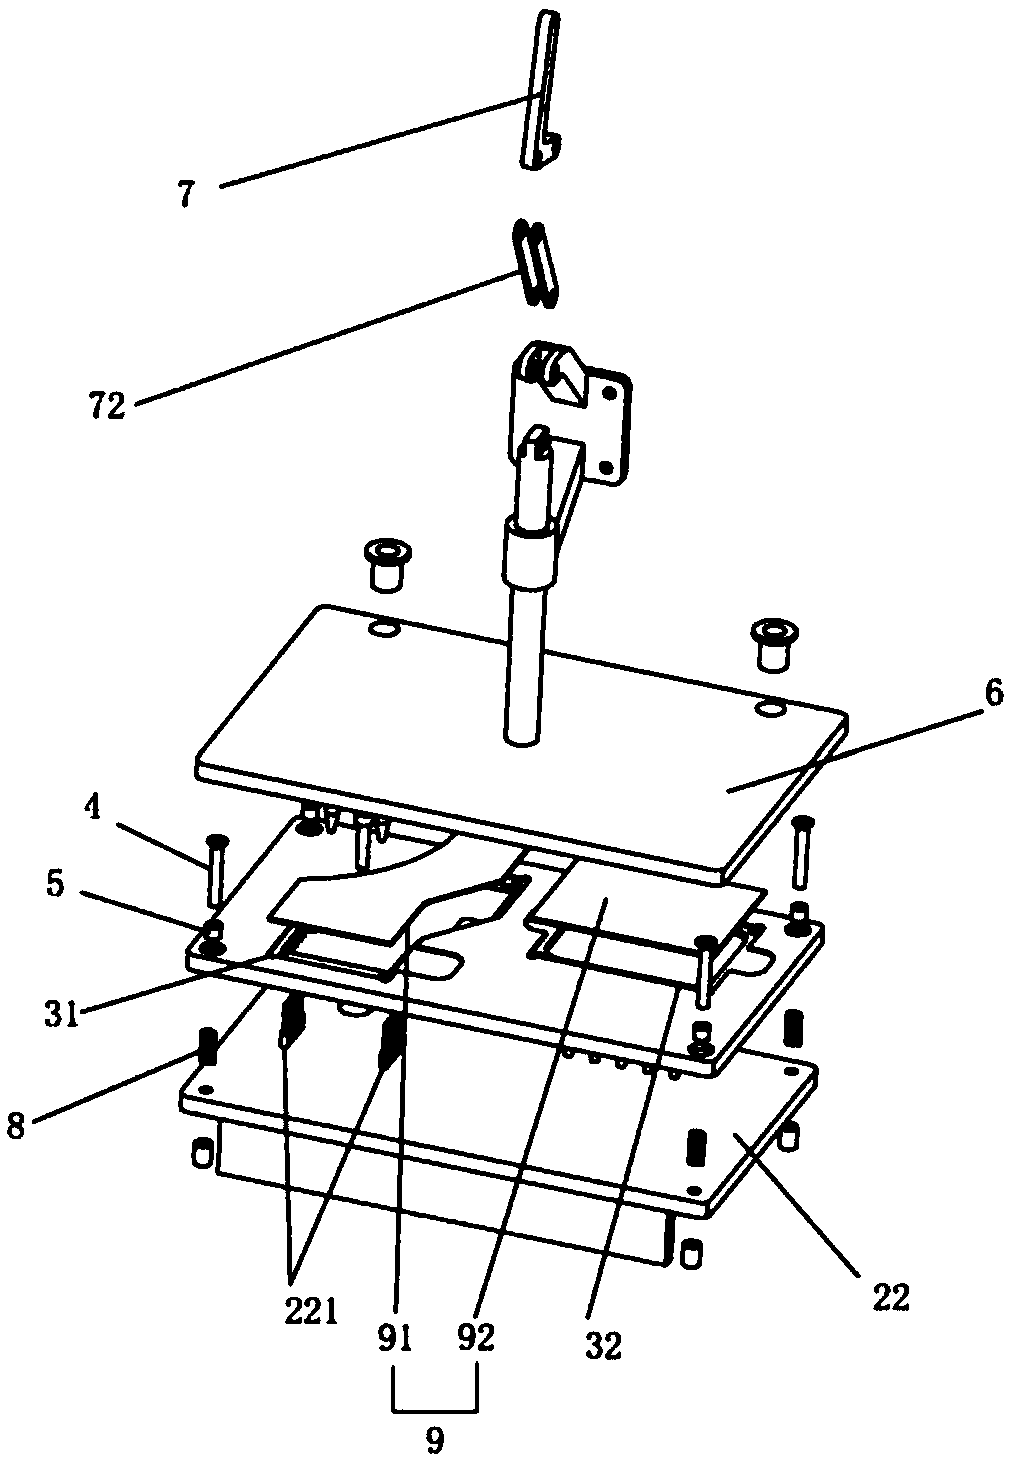 Circuit board detection device